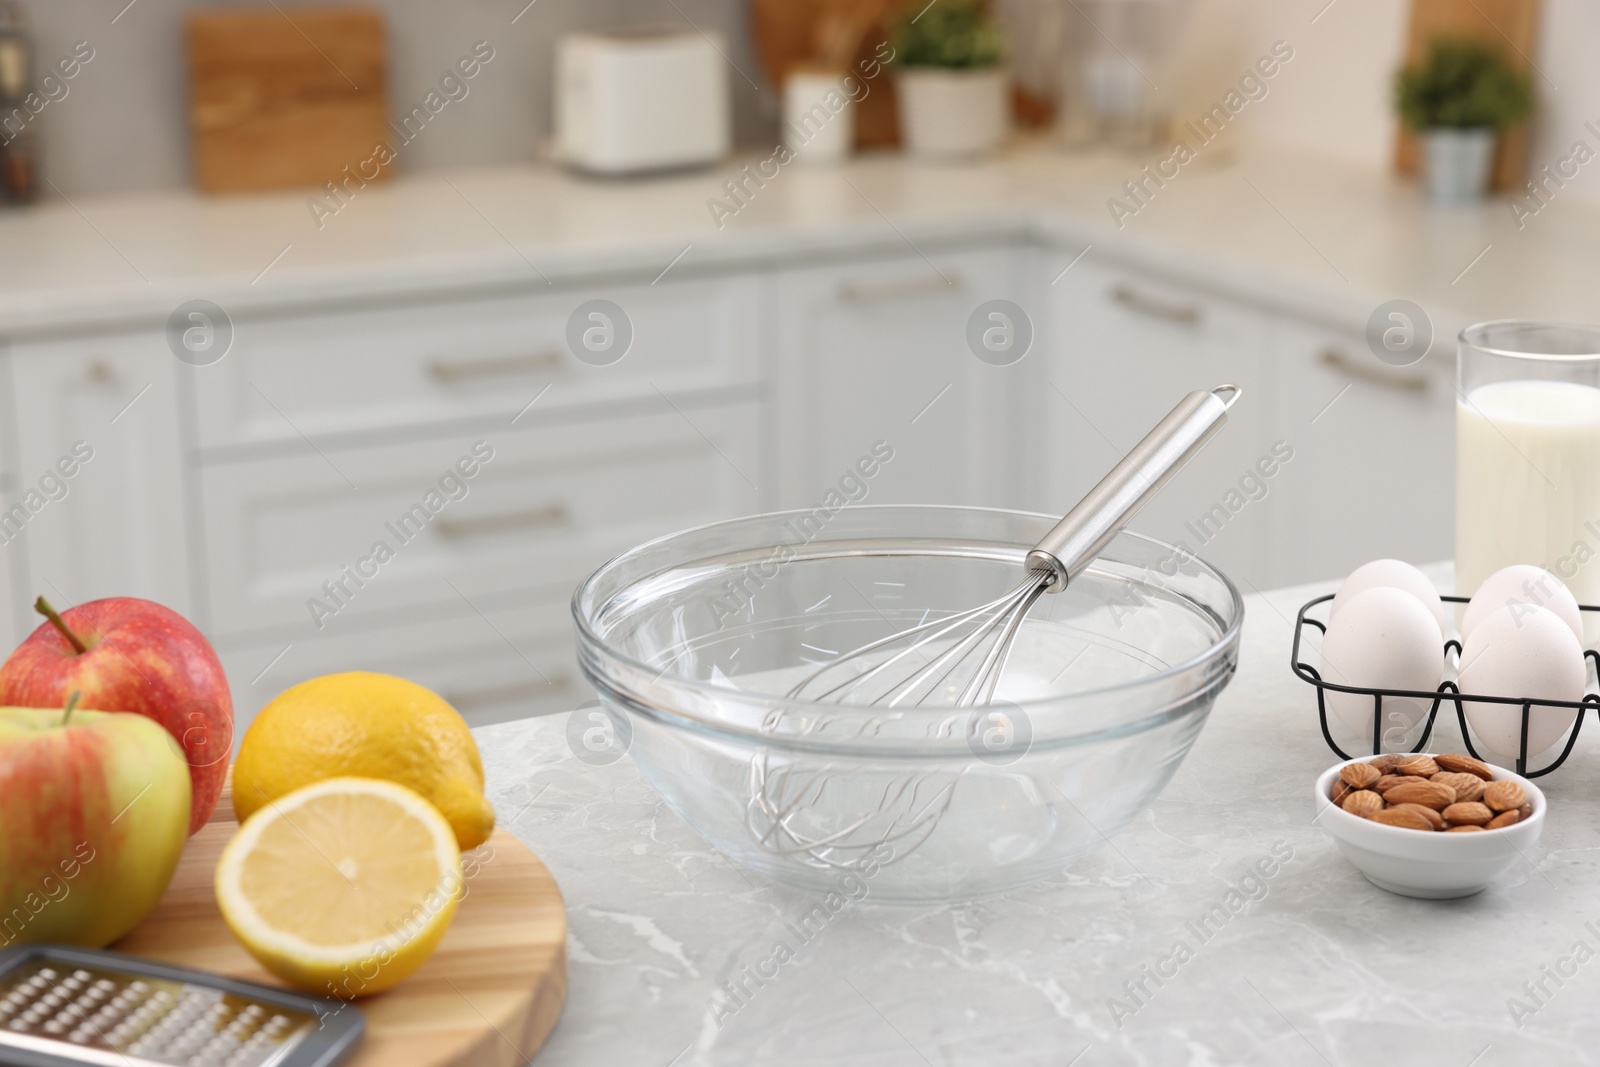 Photo of Metal whisk, bowl, grater and different products on gray marble table in kitchen